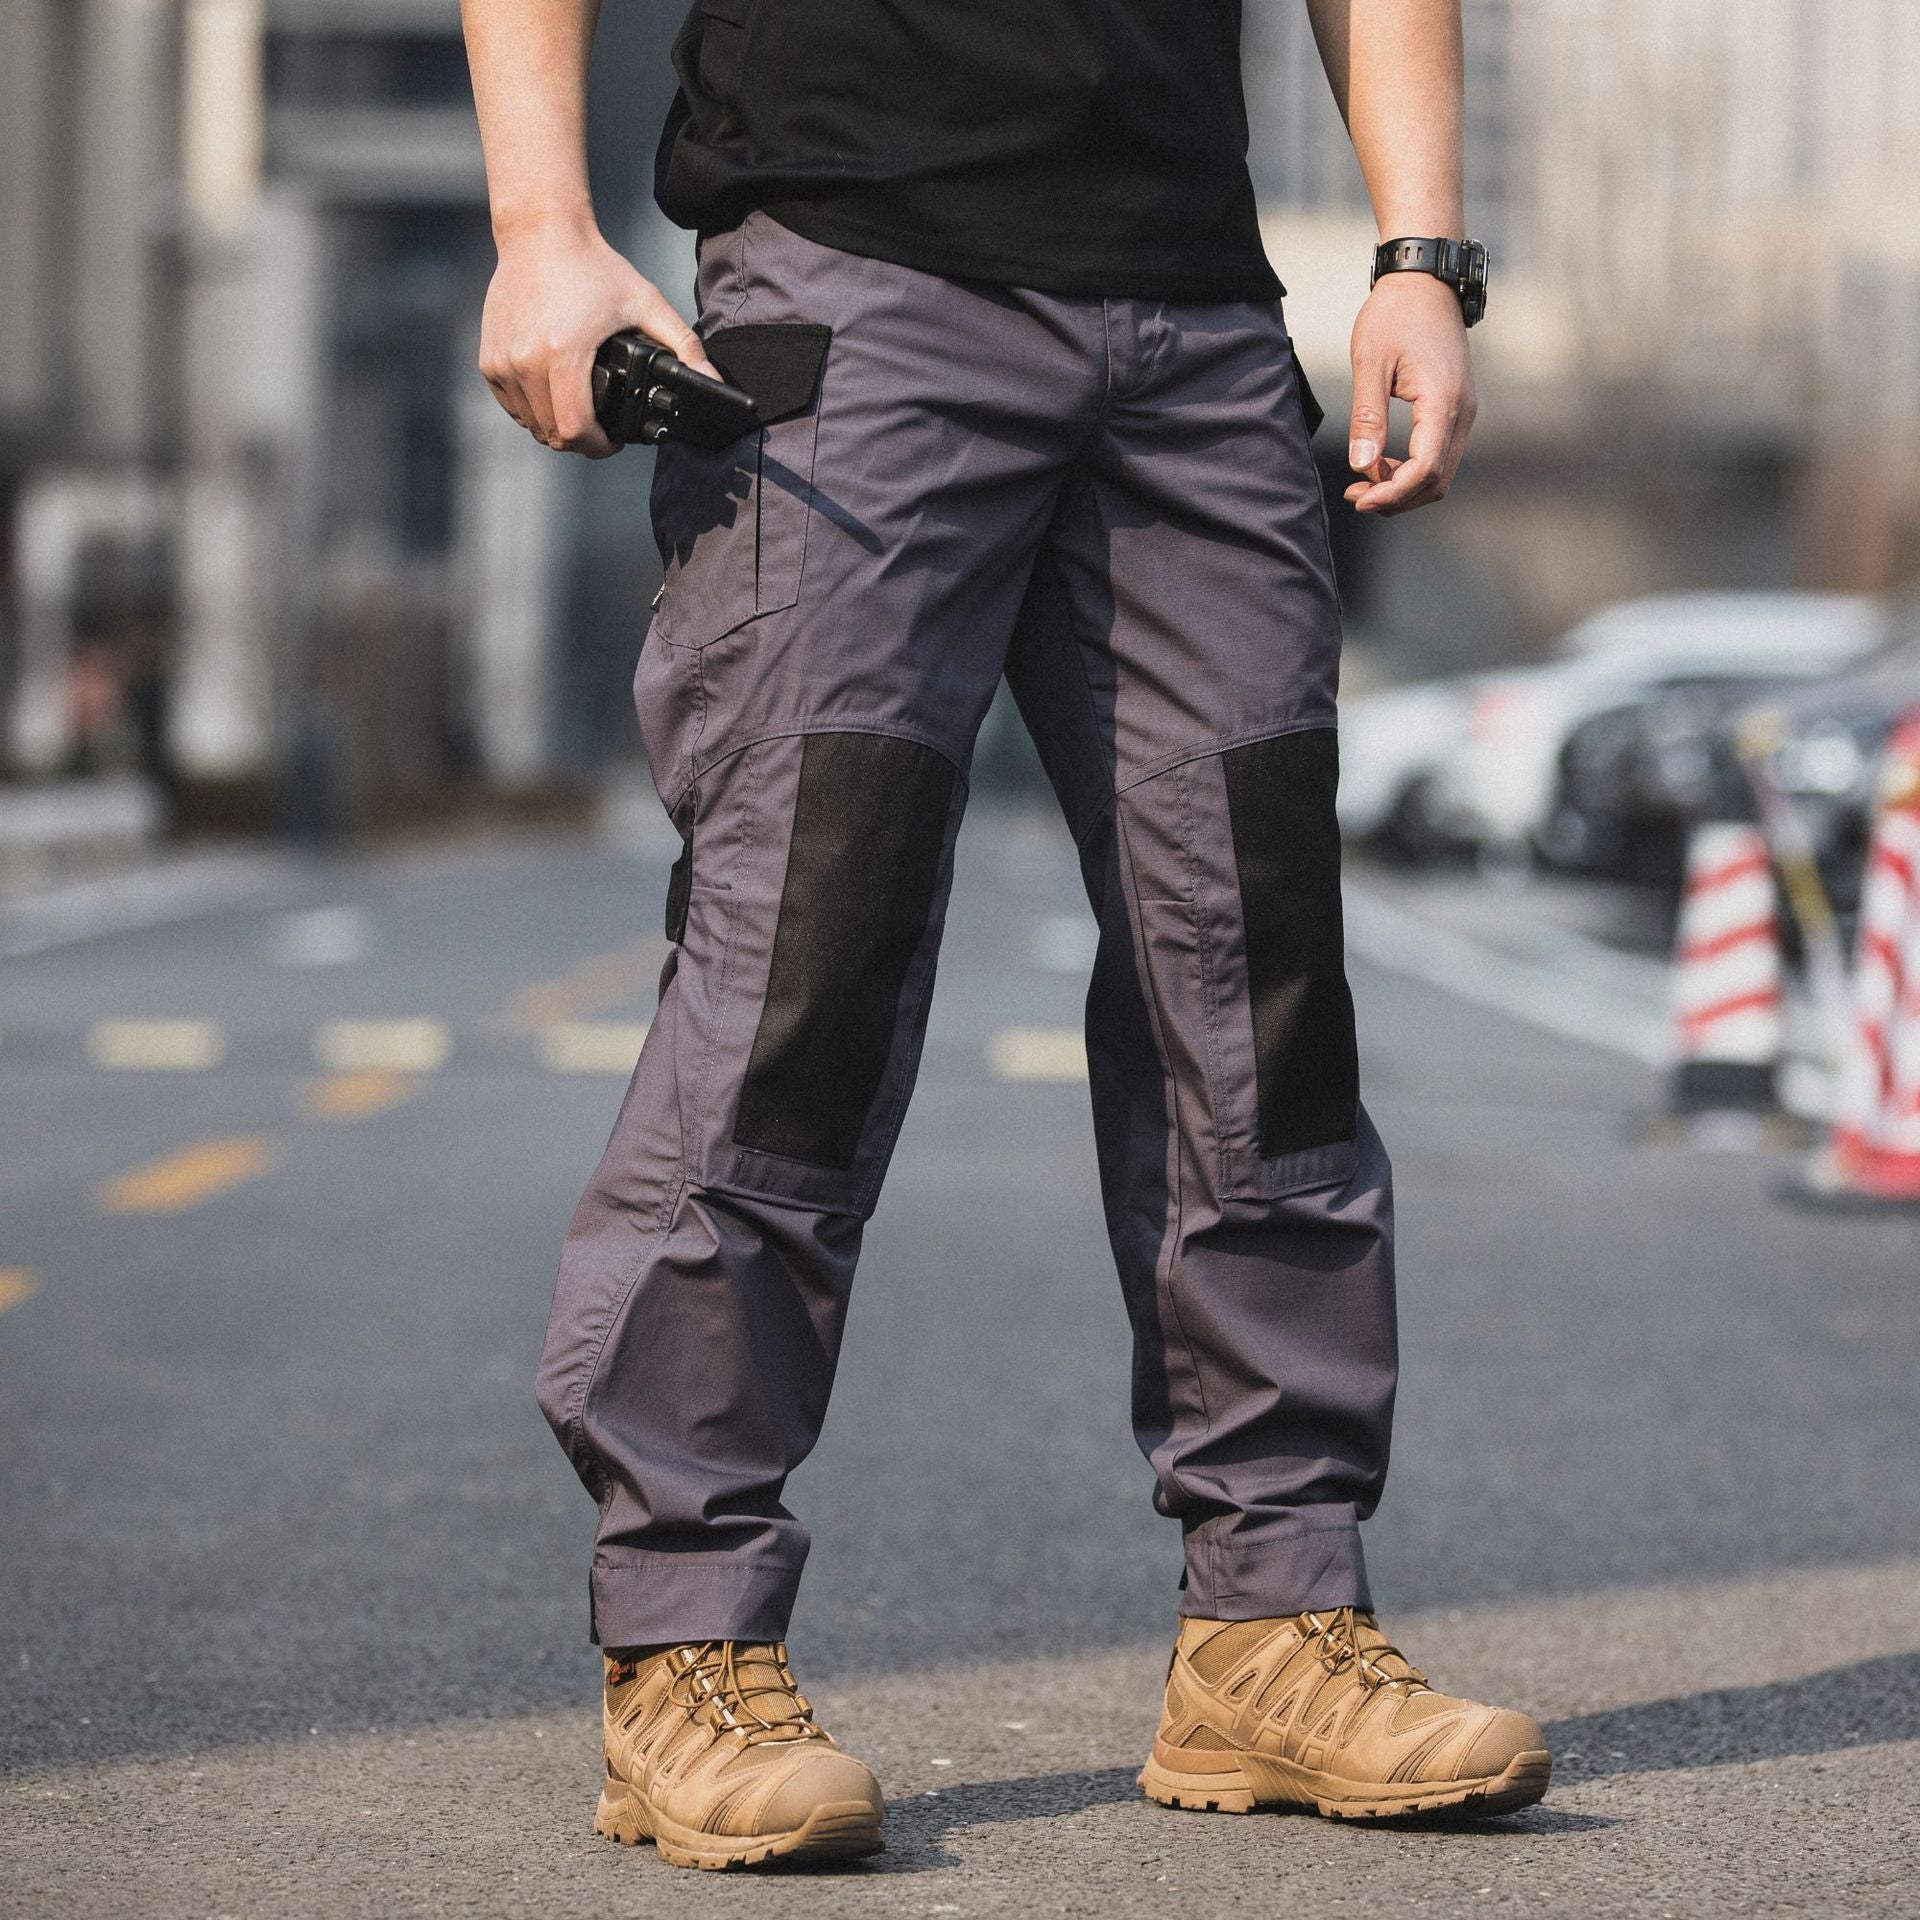 High-Quality Men's Tactical Pants for Outdoor and Military Use